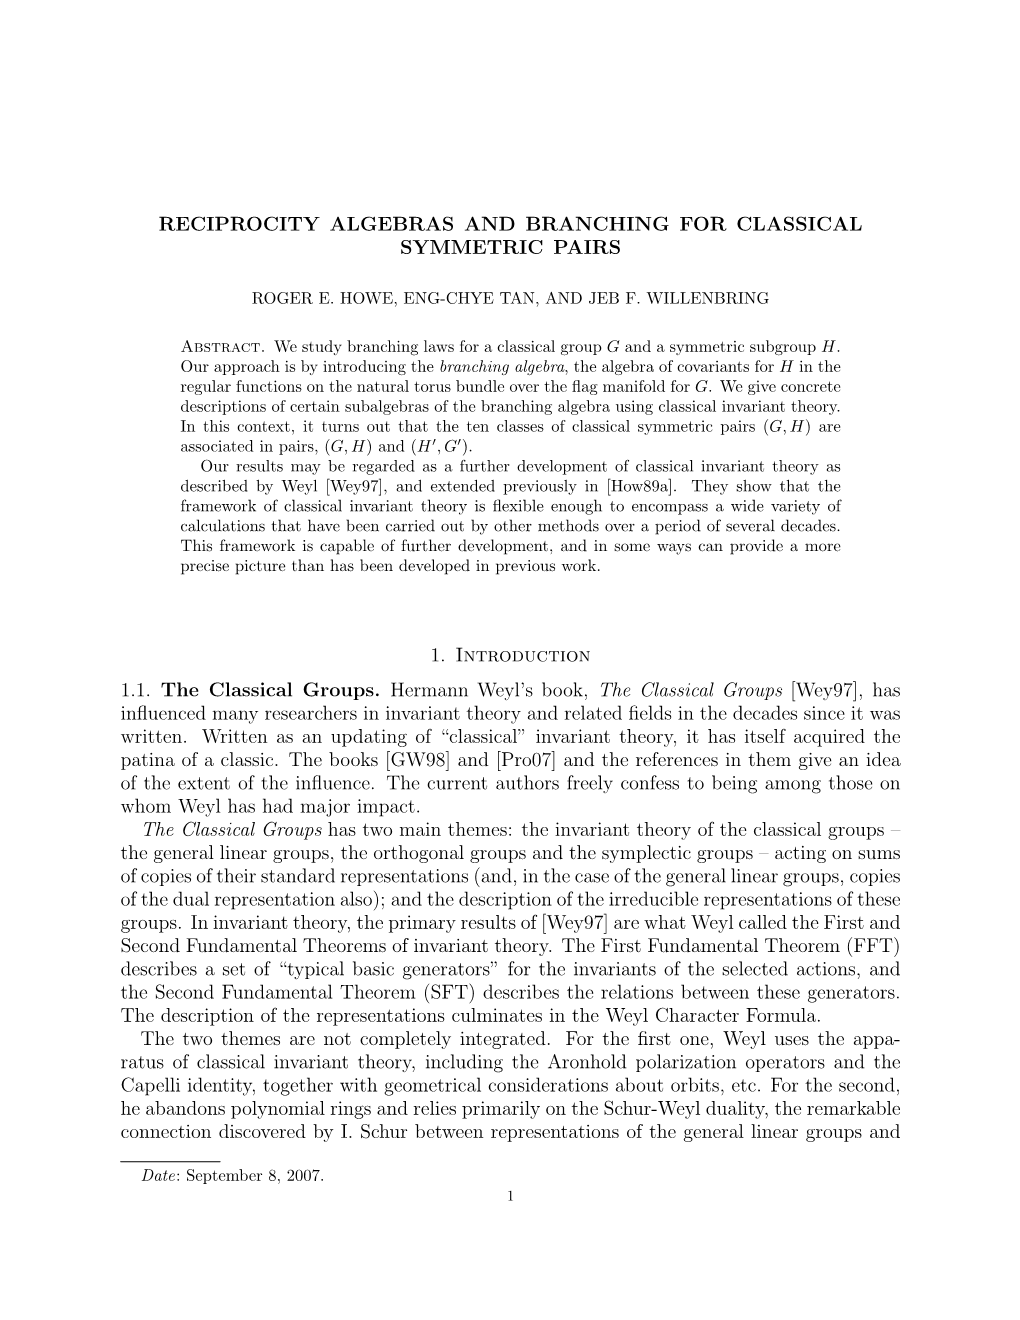 Reciprocity Algebras and Branching for Classical Symmetric Pairs